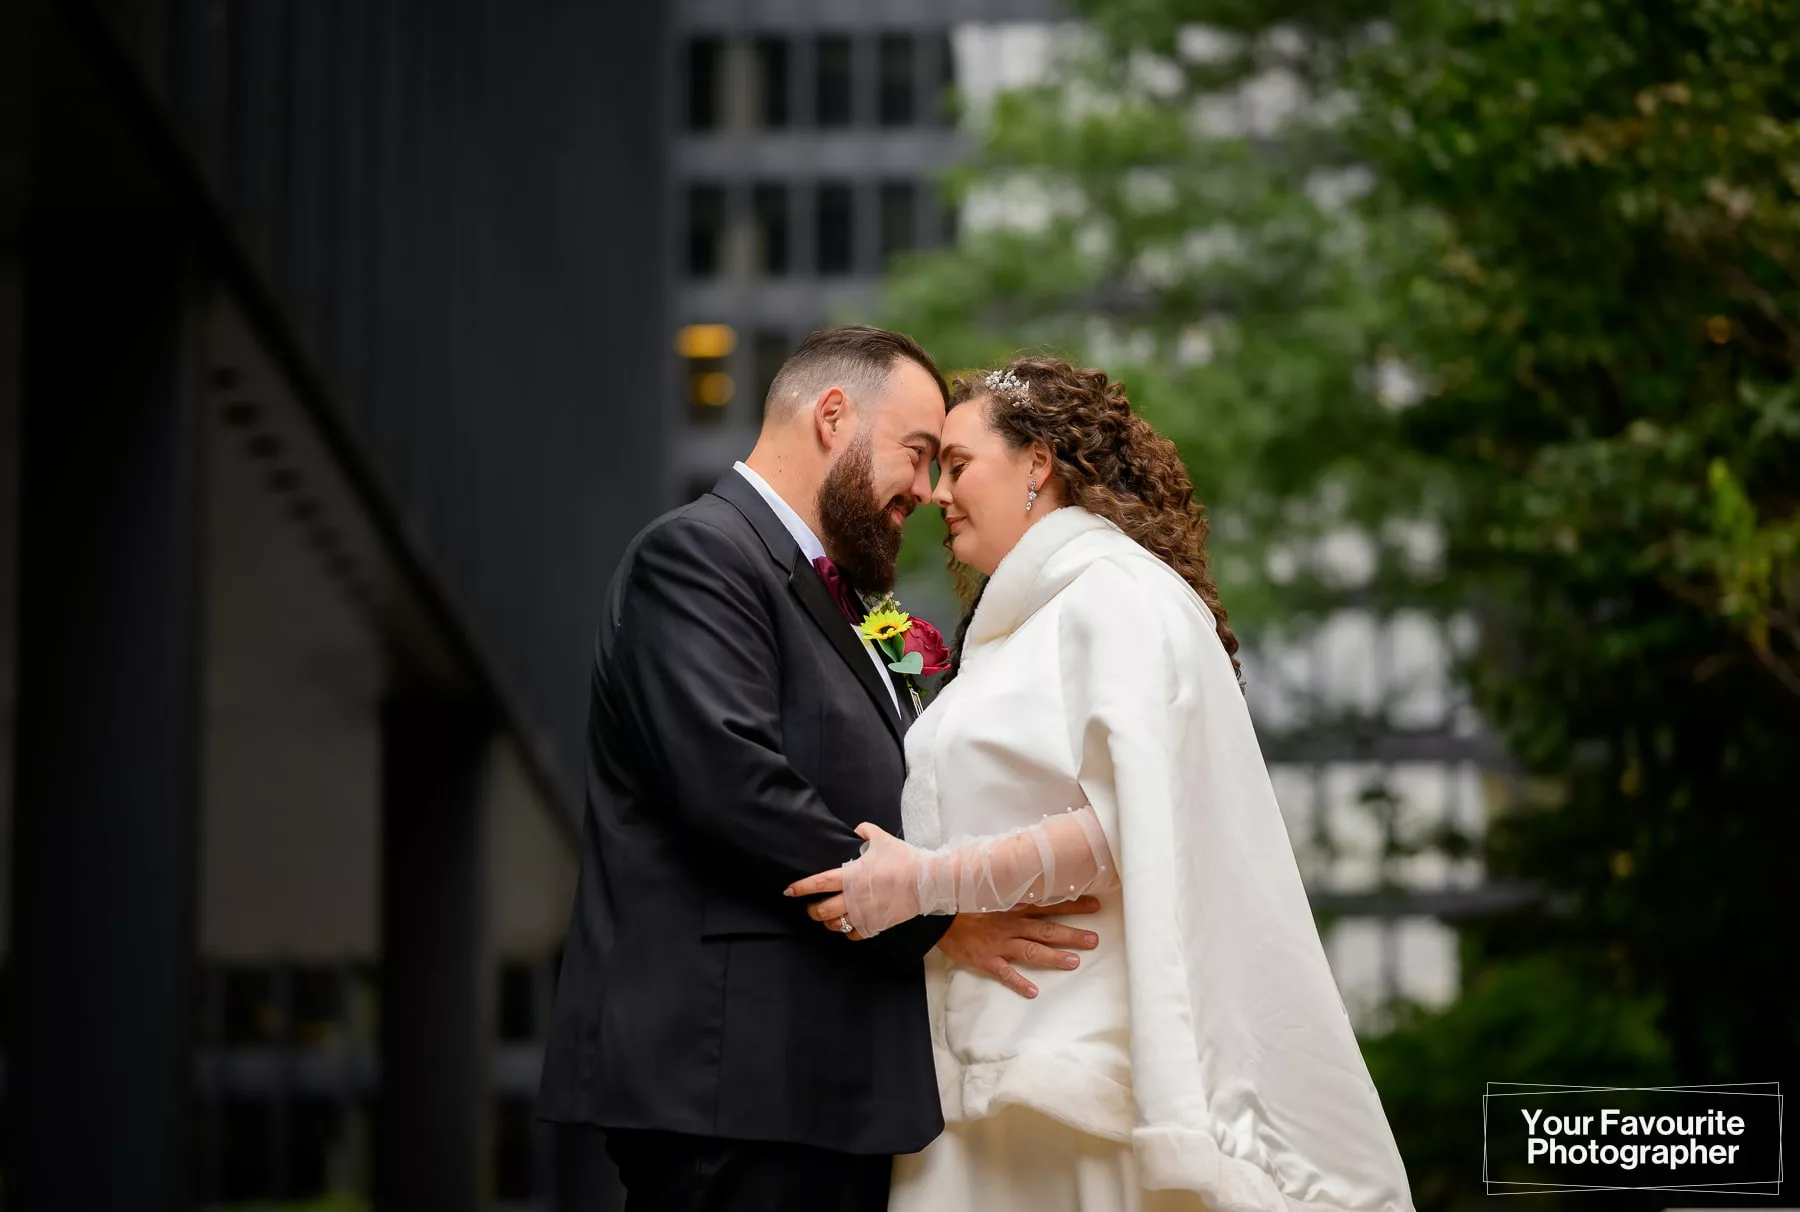 Bride and groom pose for a formal portrait with their foreheads together, in front of downtown Toronto office buildings, on Pearl St